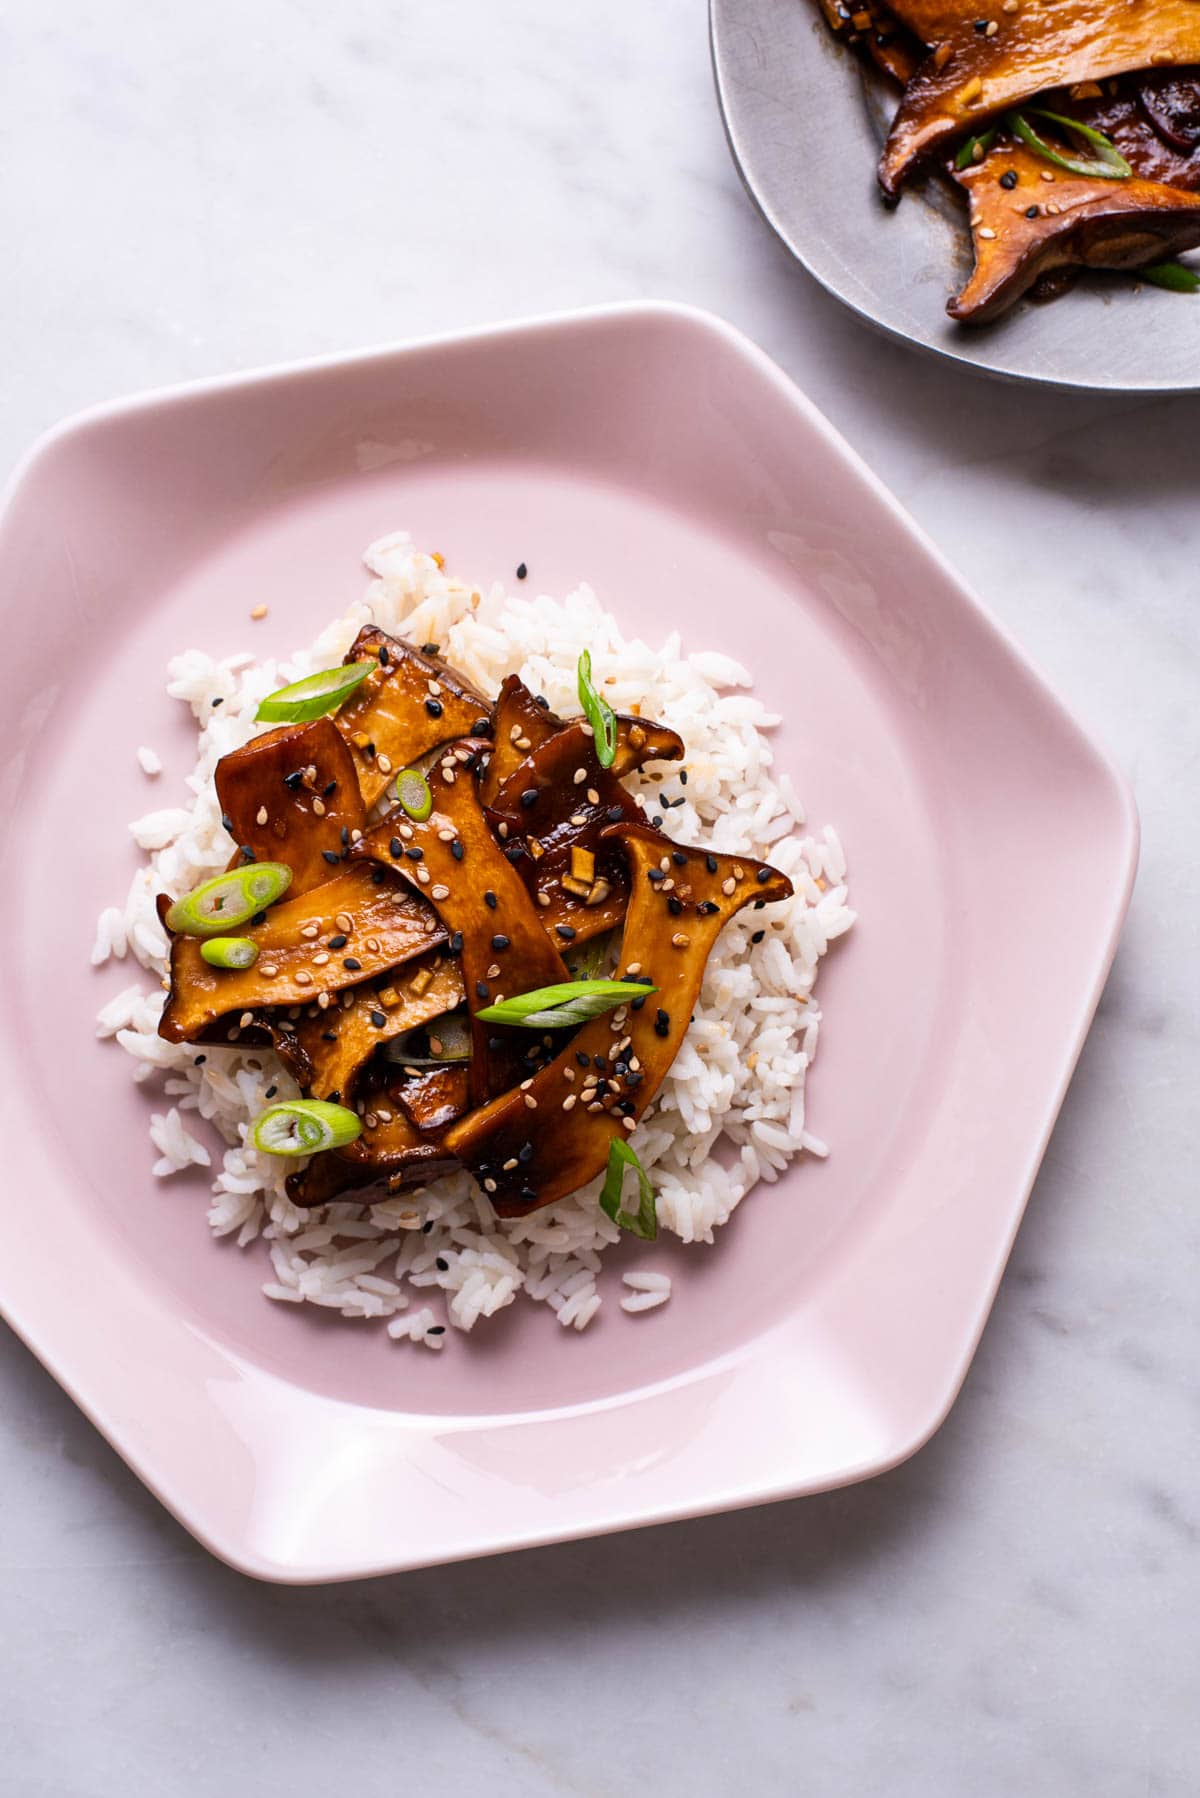 Soy-glazed trumpet mushrooms on white rice with scallions.